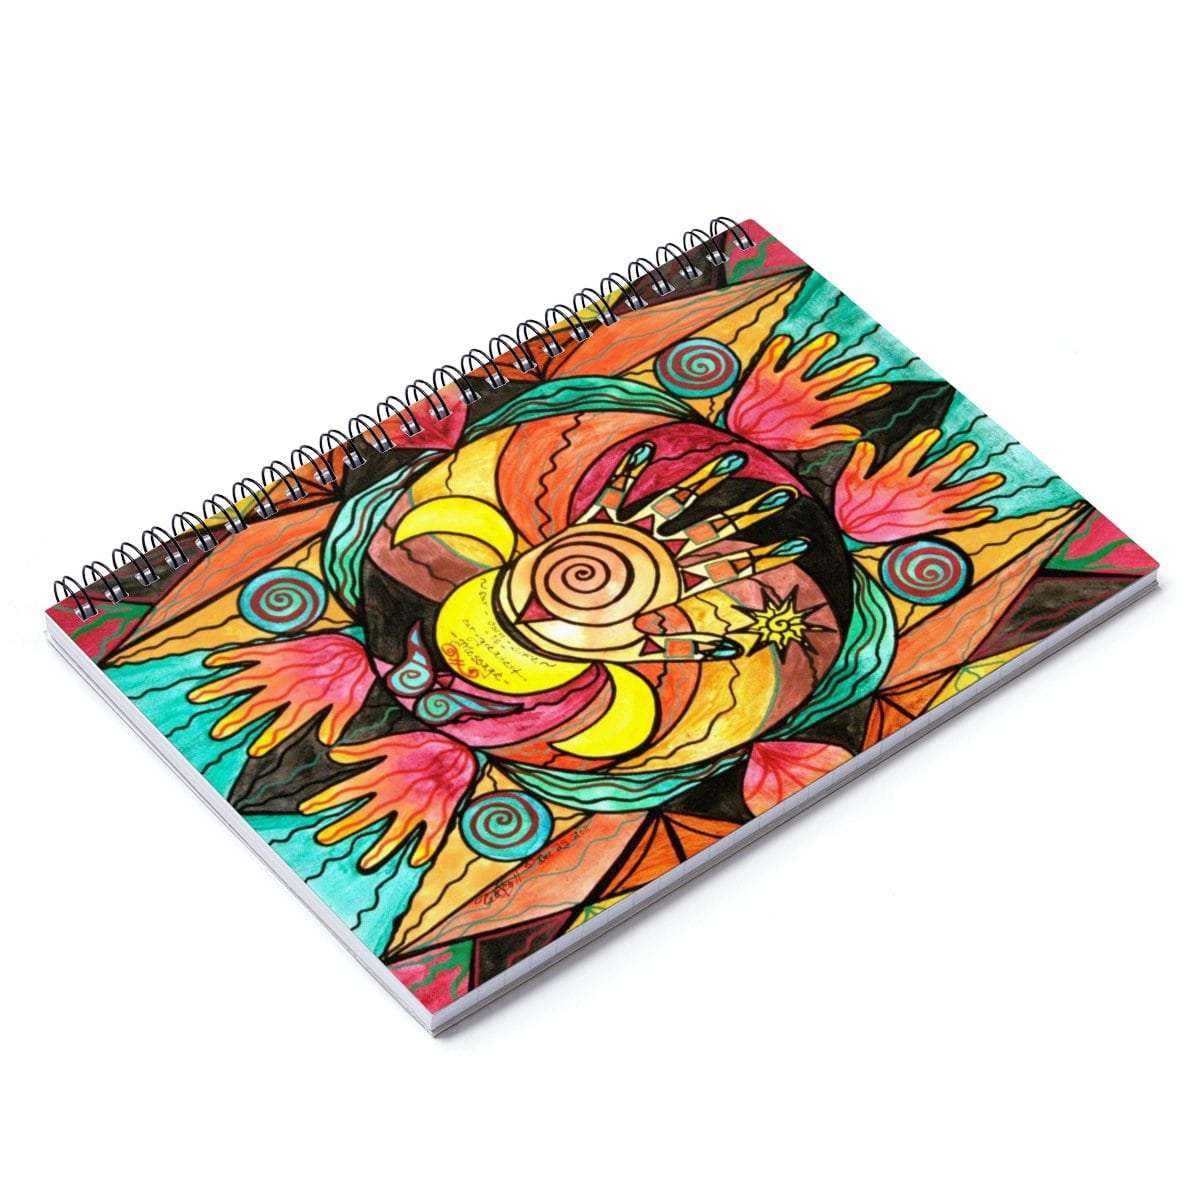 Thay Quote - Spiral Notebook